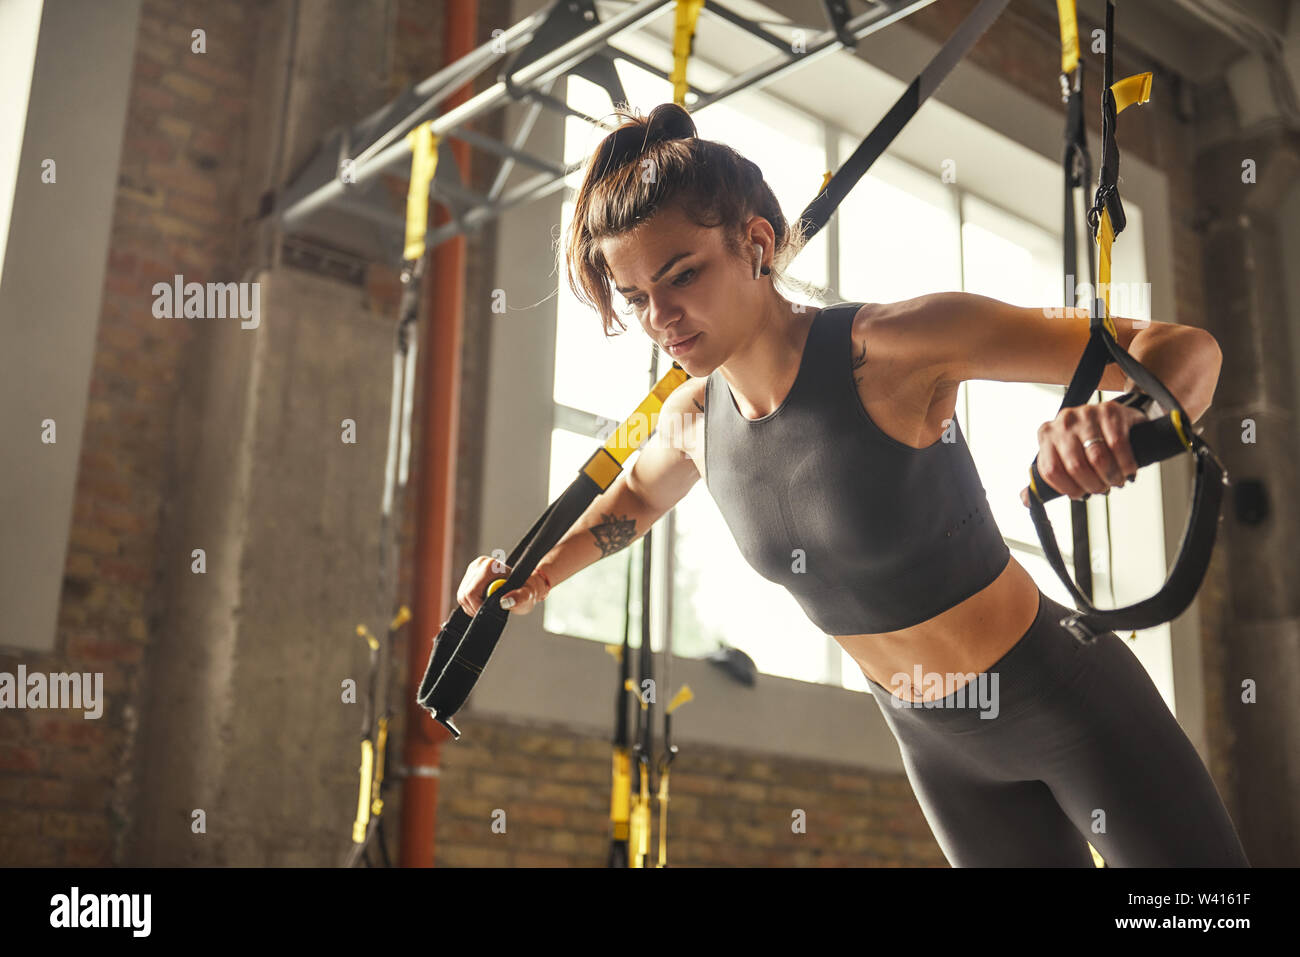 Female Near Trx Straps Stand. Stock Photo - Image of fitness, lifestyle:  116699362